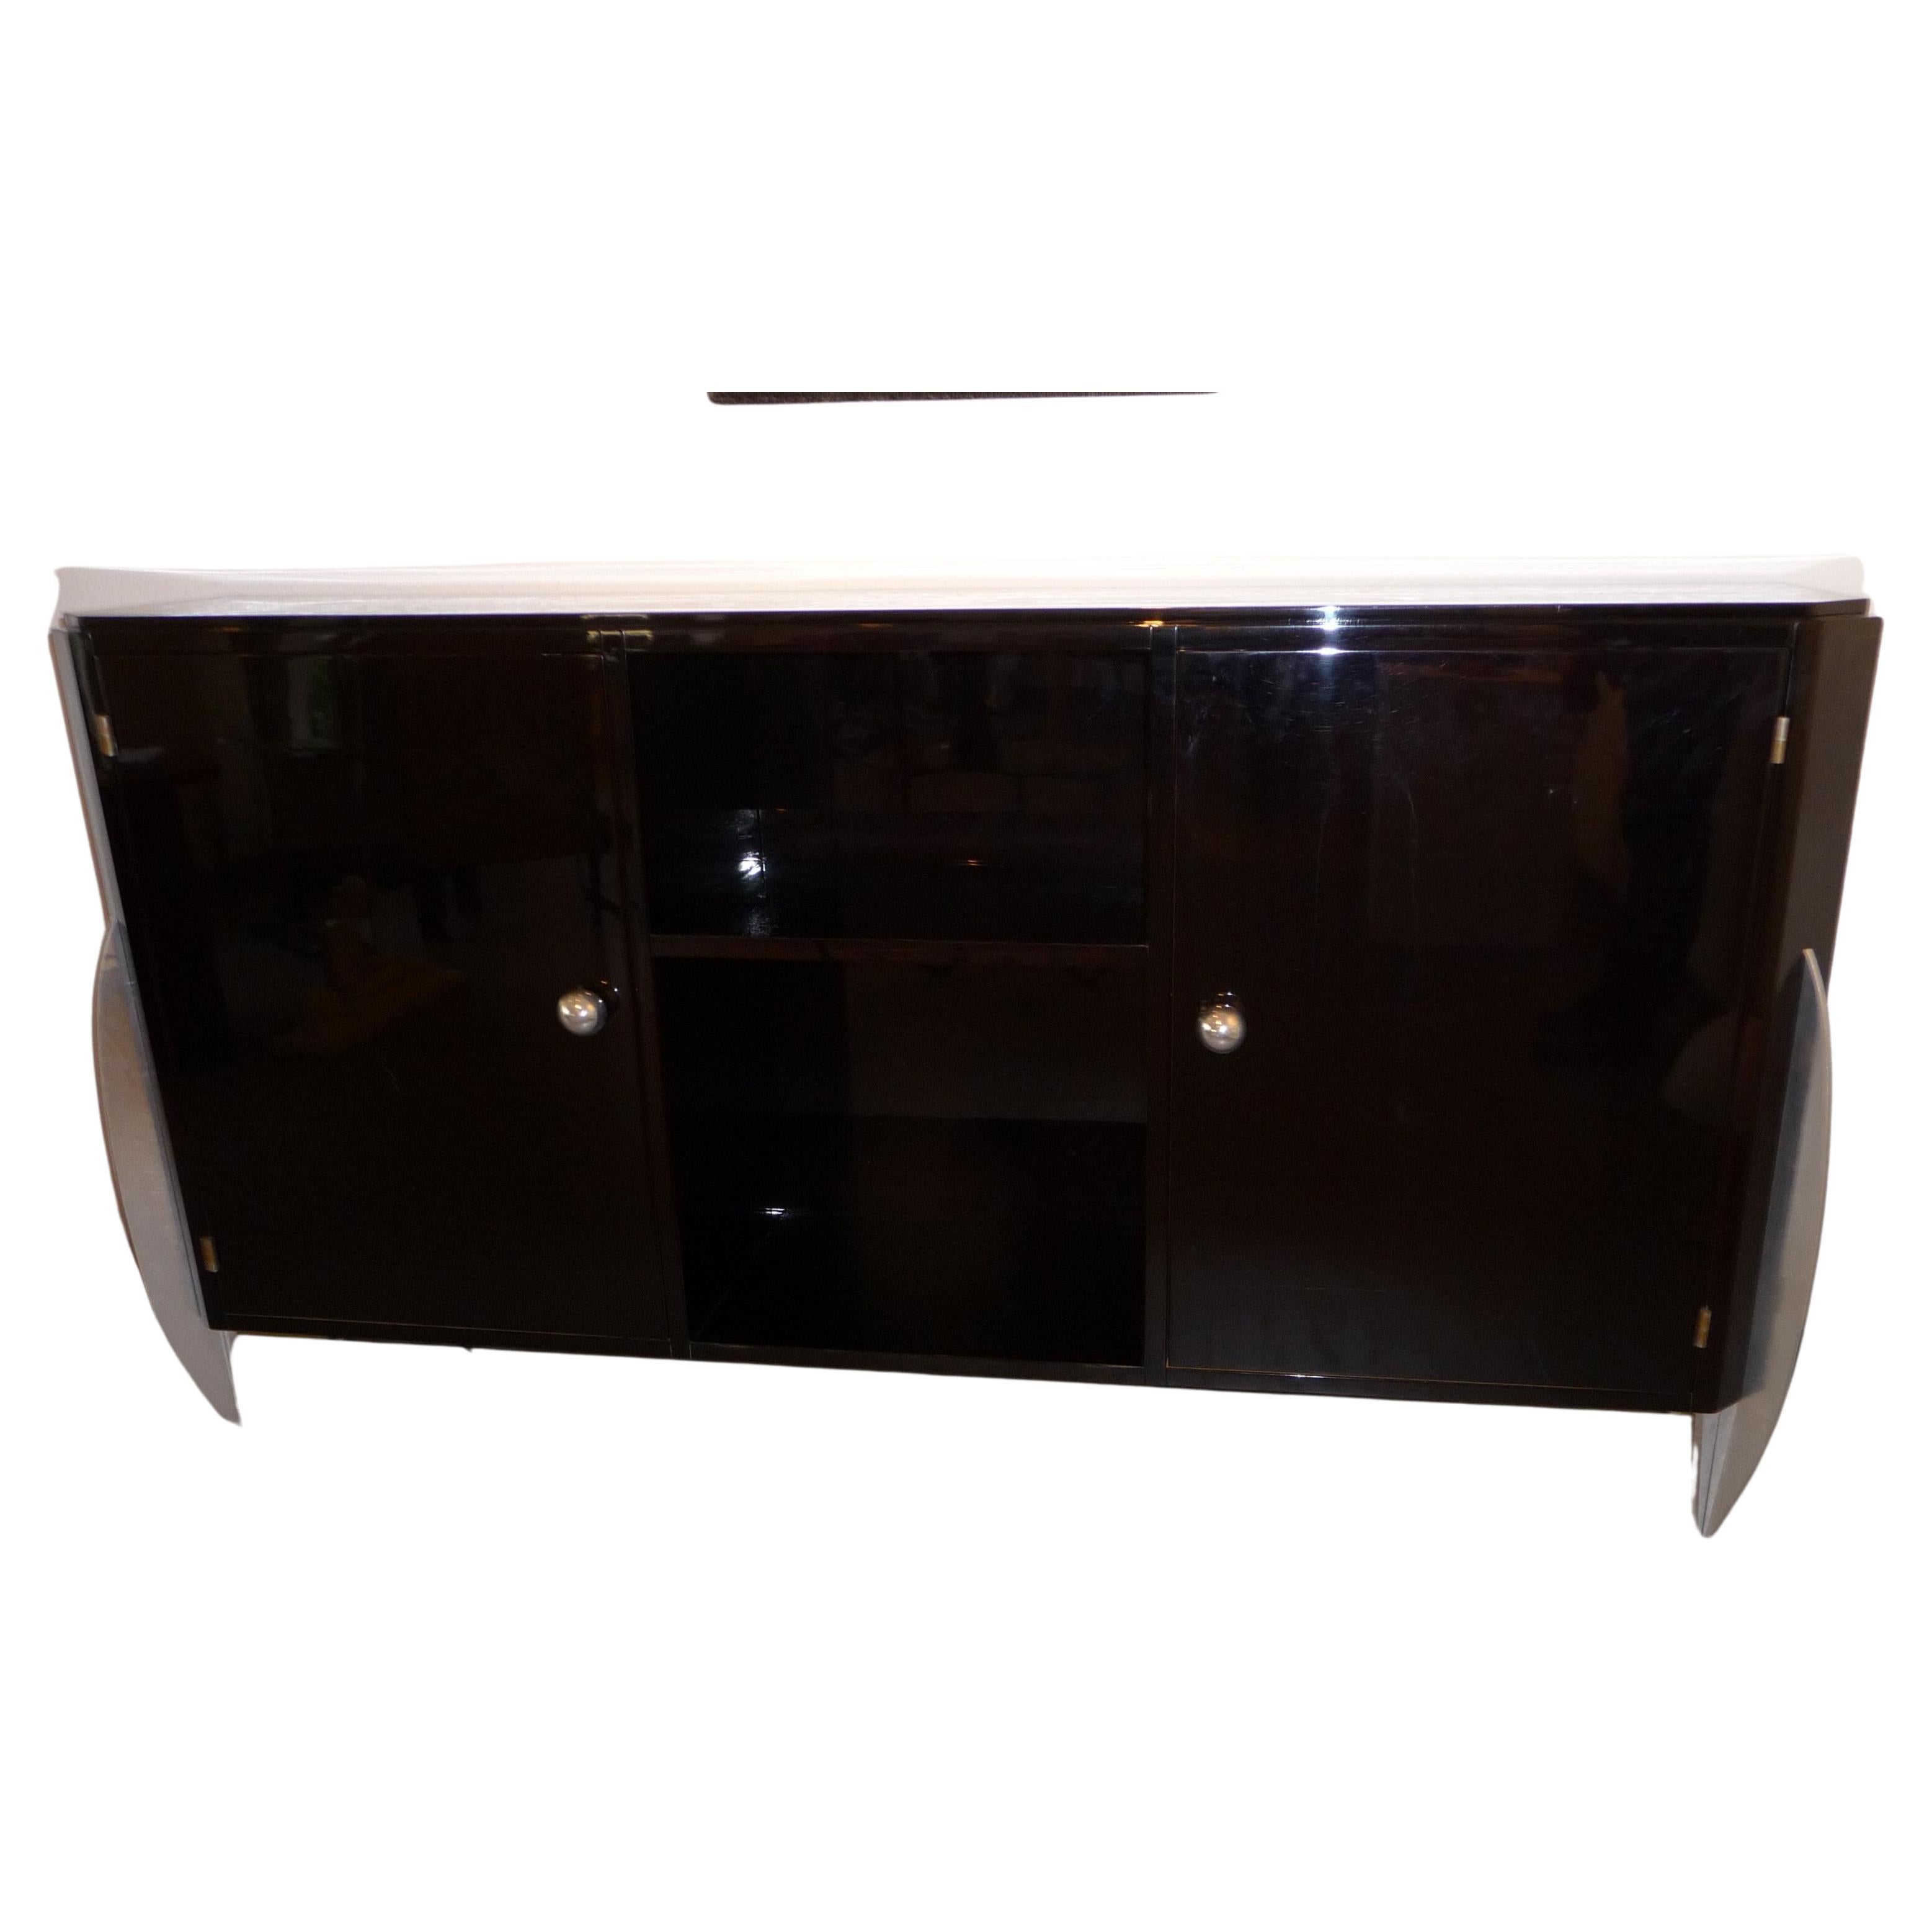 Rare signed two-door sideboard with a central inner compartment by Michel Dufet. France 1930s.
For 